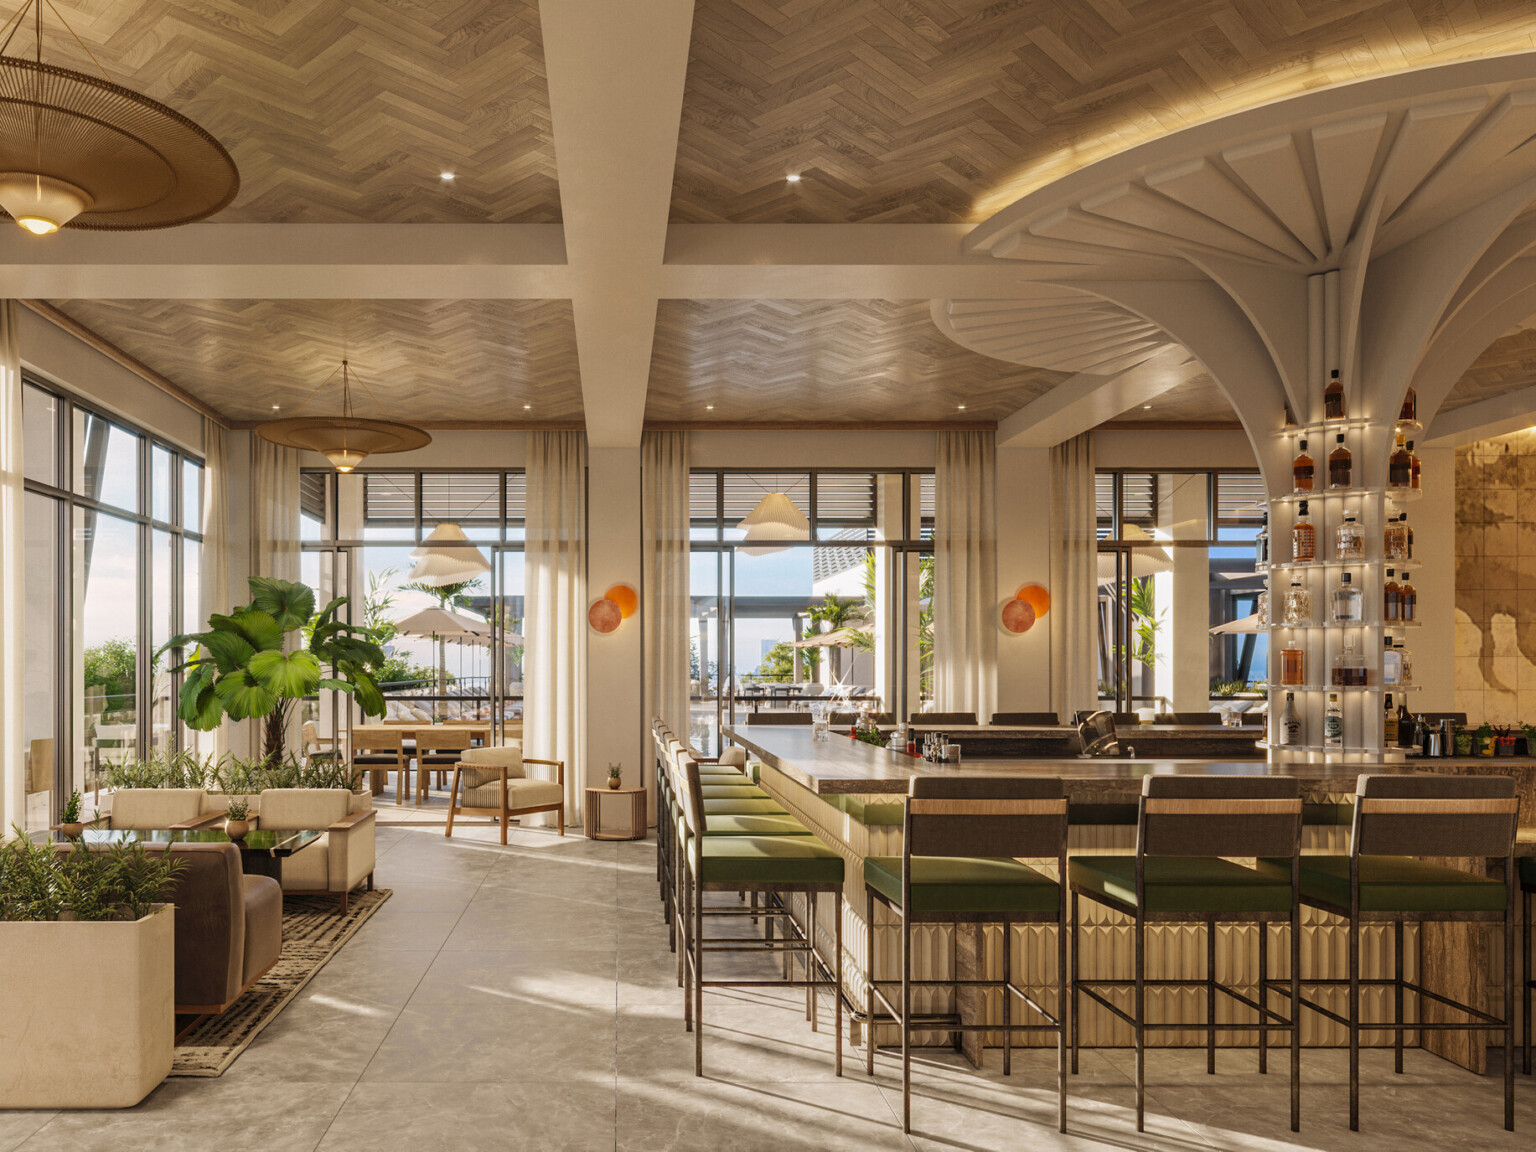 Elegant hotel bar with wooden chevron ceiling, white beams, uplighting, and bar stools with green cushions